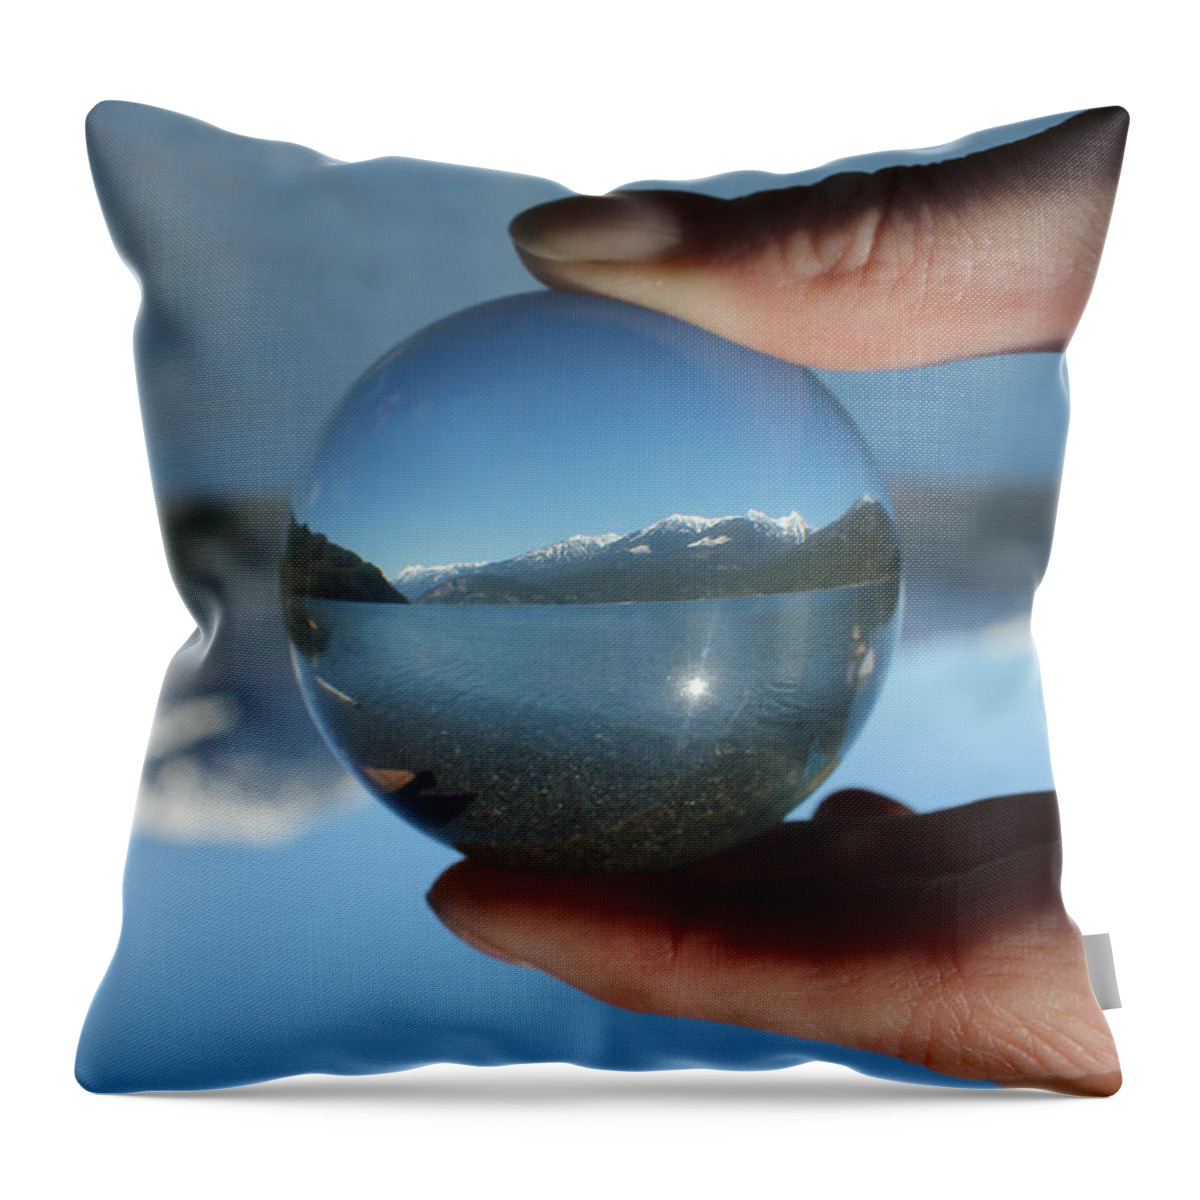 Spring Throw Pillow featuring the photograph Spring In The Kootenays by Cathie Douglas